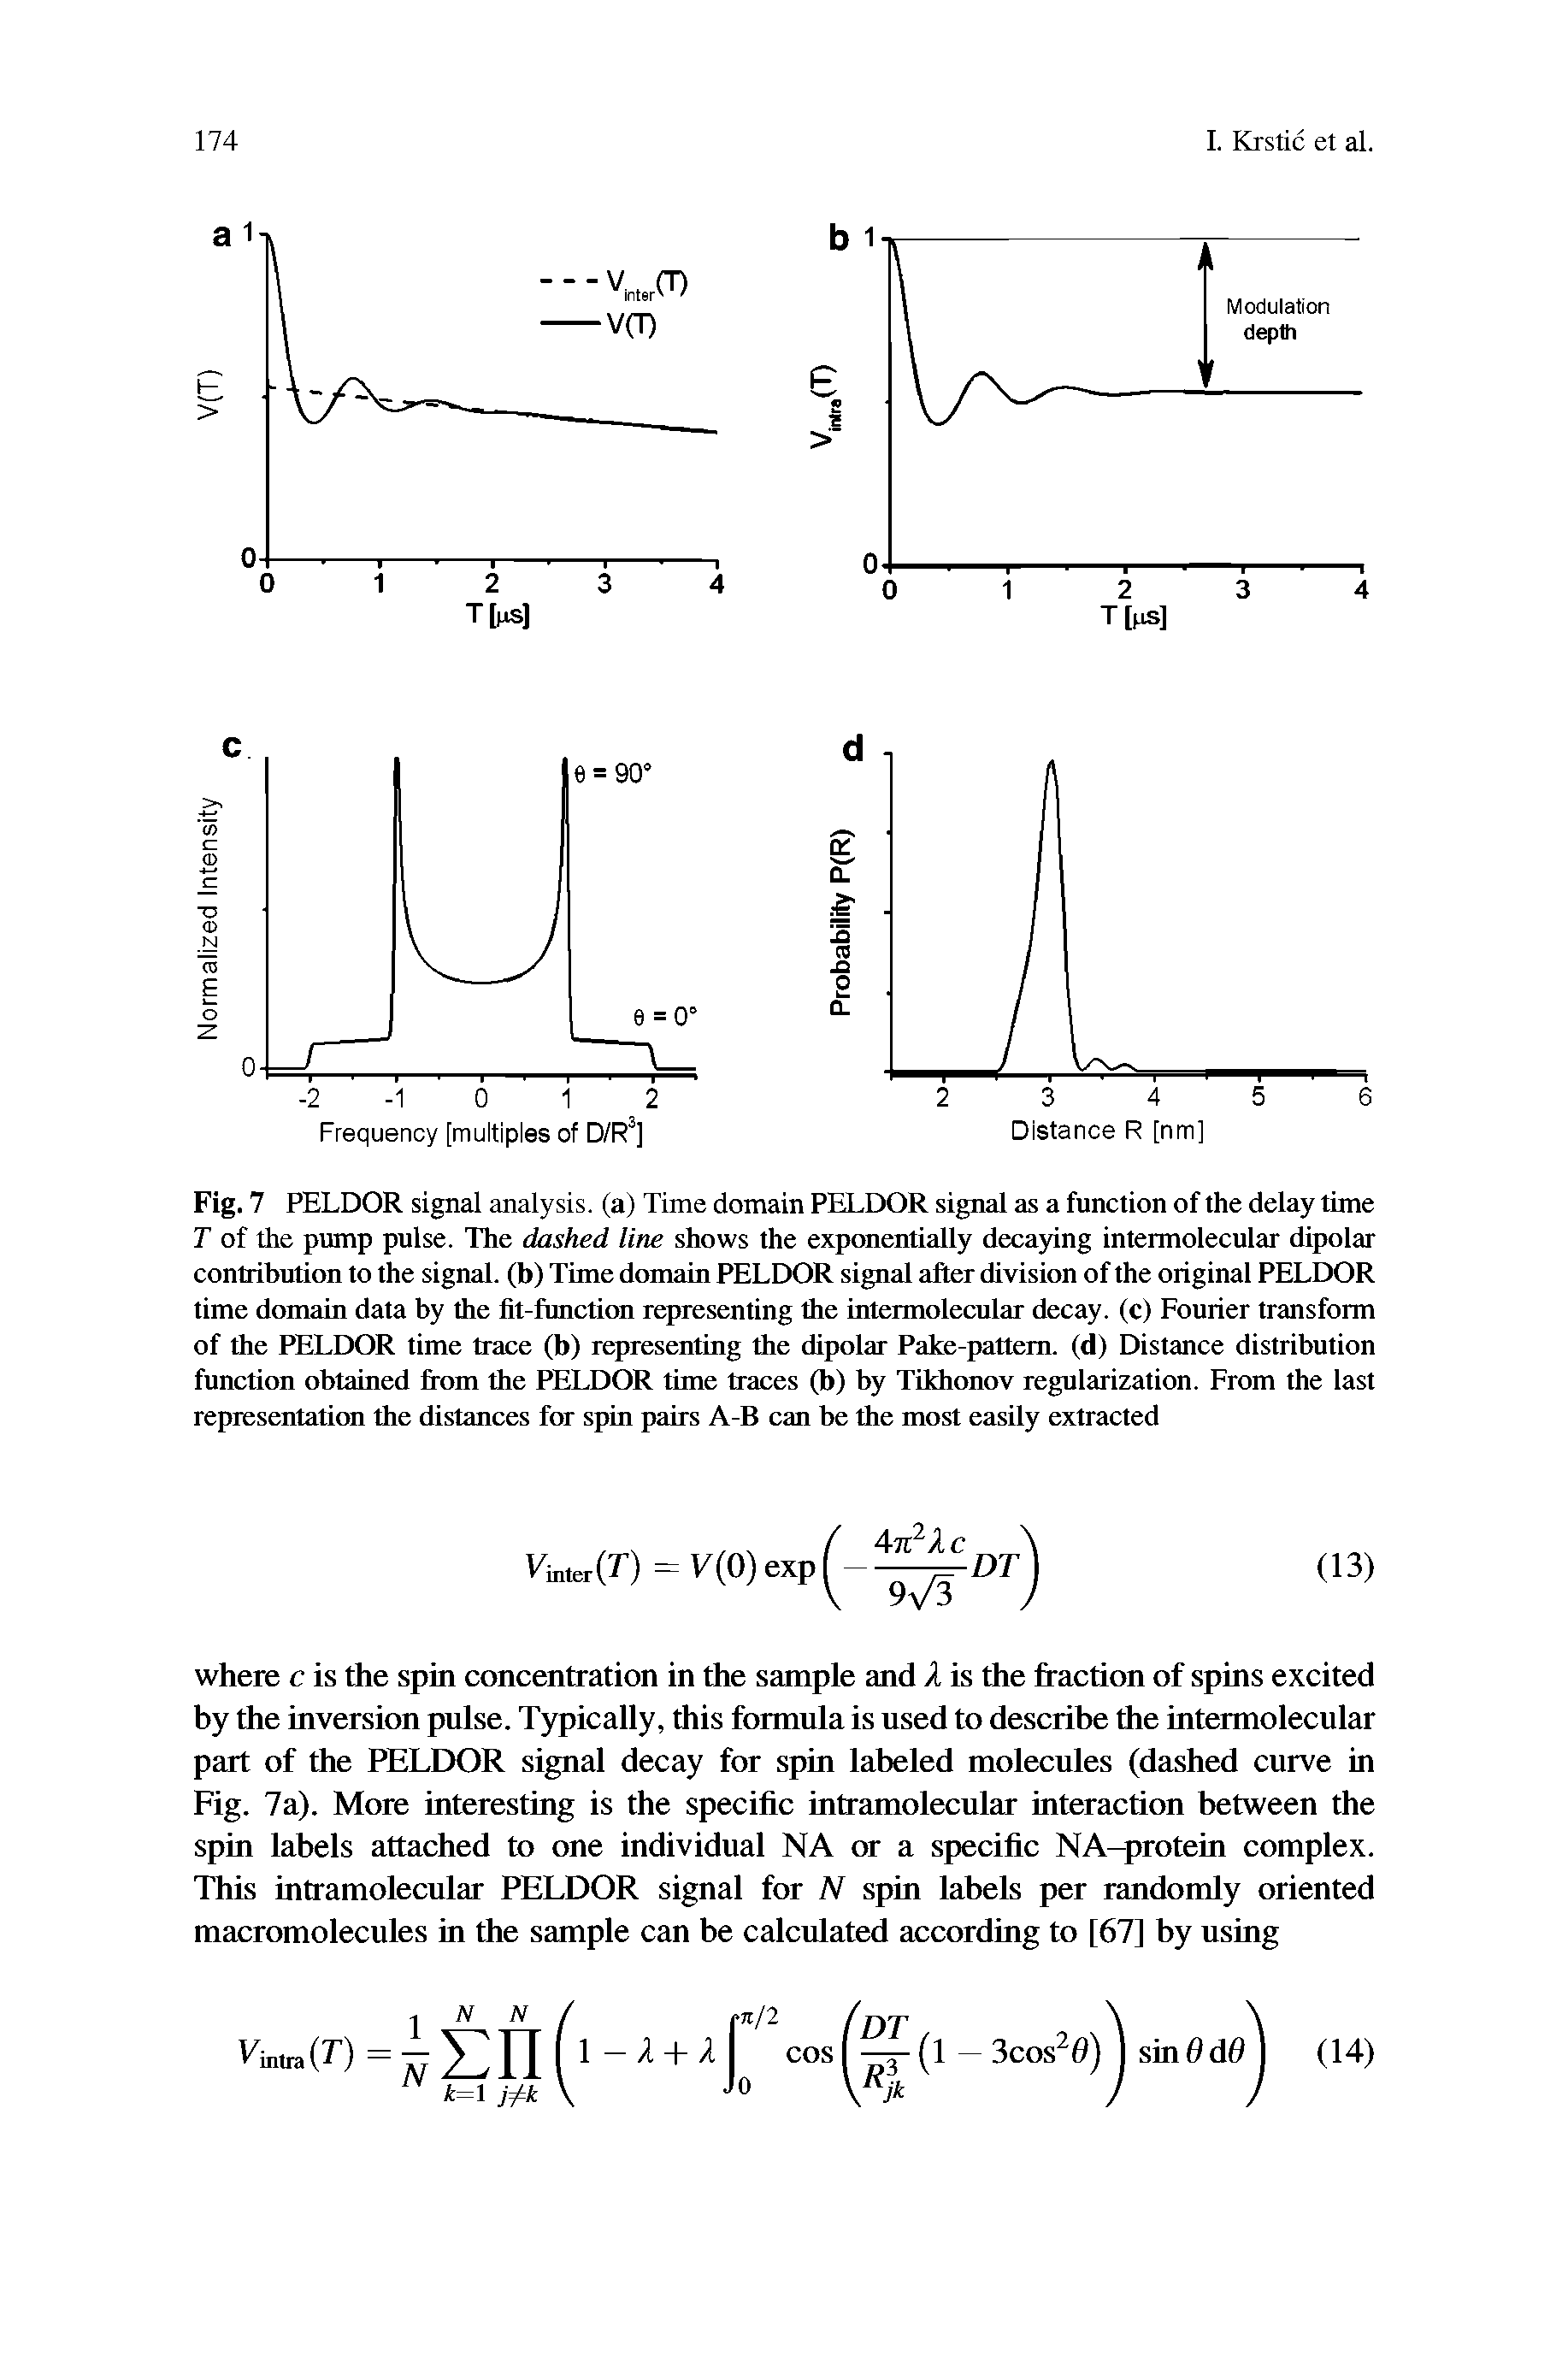 Fig. 7 PELDOR signal analysis, (a) Time domain PELDOR signal as a function of the delay time T of the pump pulse. The dashed line shows the exponentially decaying intermolecular dipolar contribution to the signal, (b) Time domain PELDOR signal after division of the original PELDOR time domain data by the fit-function representing the intermolecular decay, (c) Fourier transform of the PELDOR time trace (b) representing the dipolar Pake-pattem. (d) Distance distribution function obtained from the PELDOR time traces (b) by Tikhonov regularization. From the last representation the distances for spin pairs A-B can be the most easily extracted...